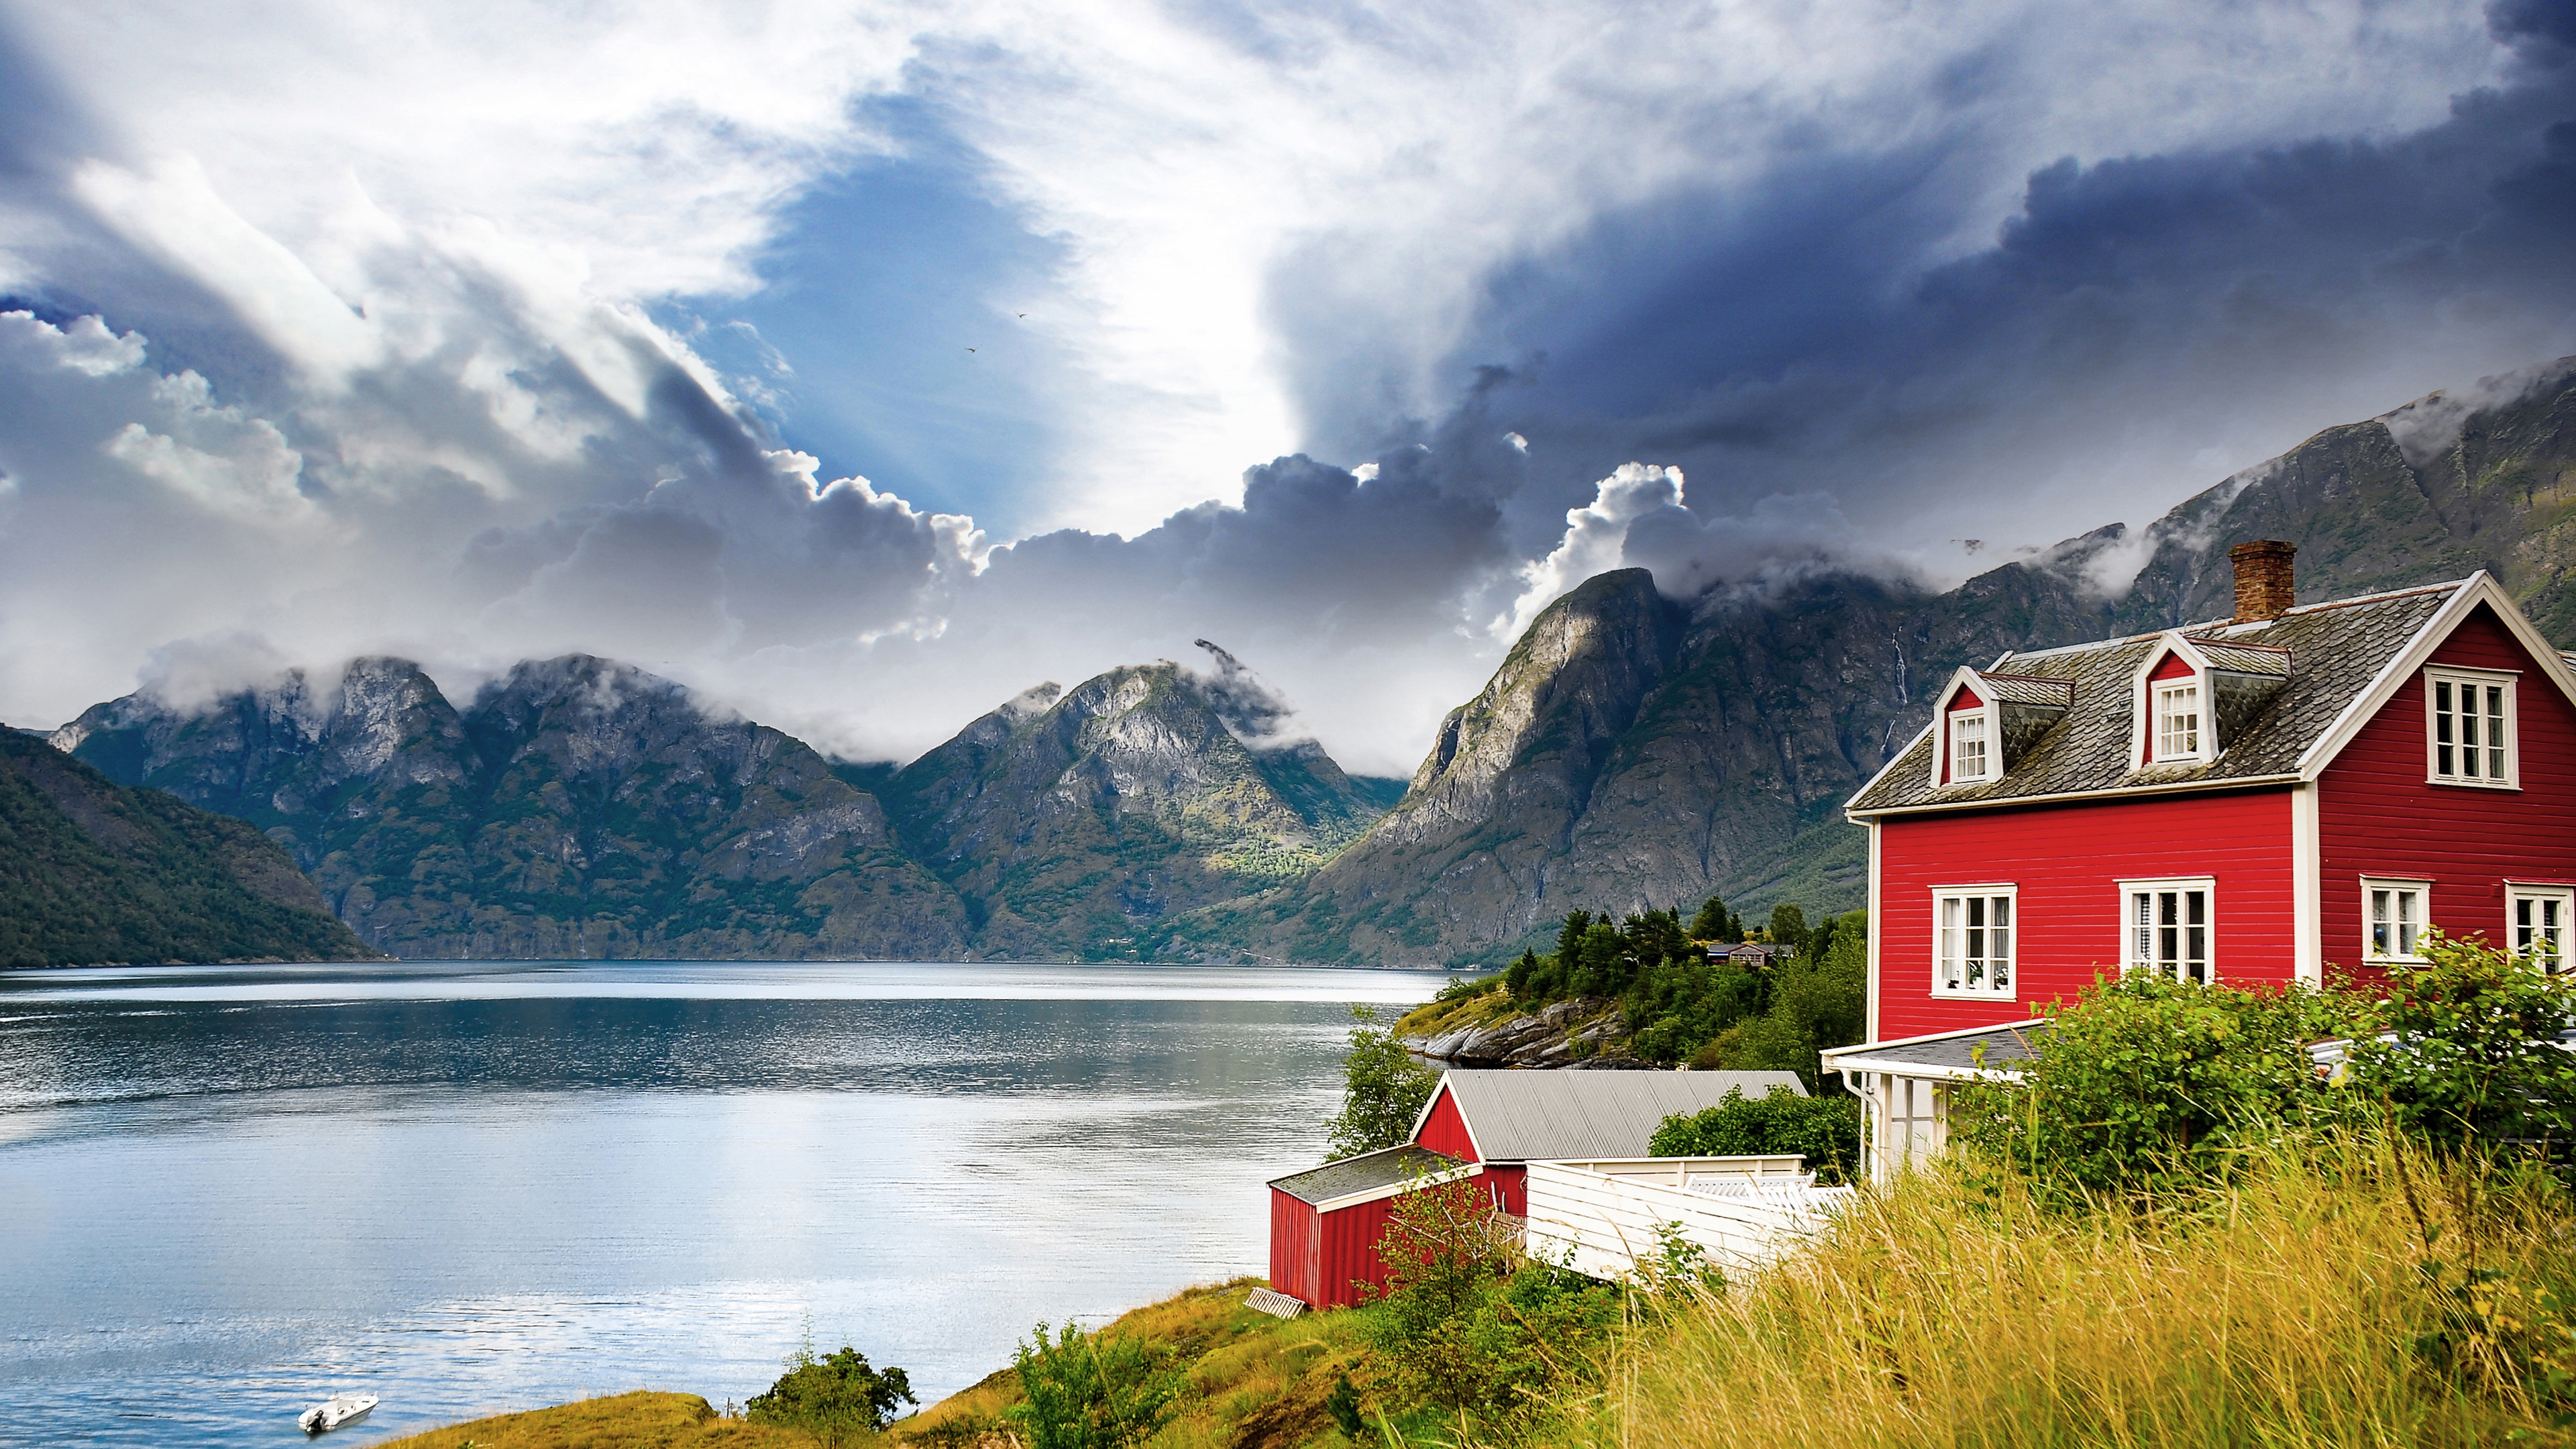 Norway Landscape for 3840 x 2160 Ultra HD resolution